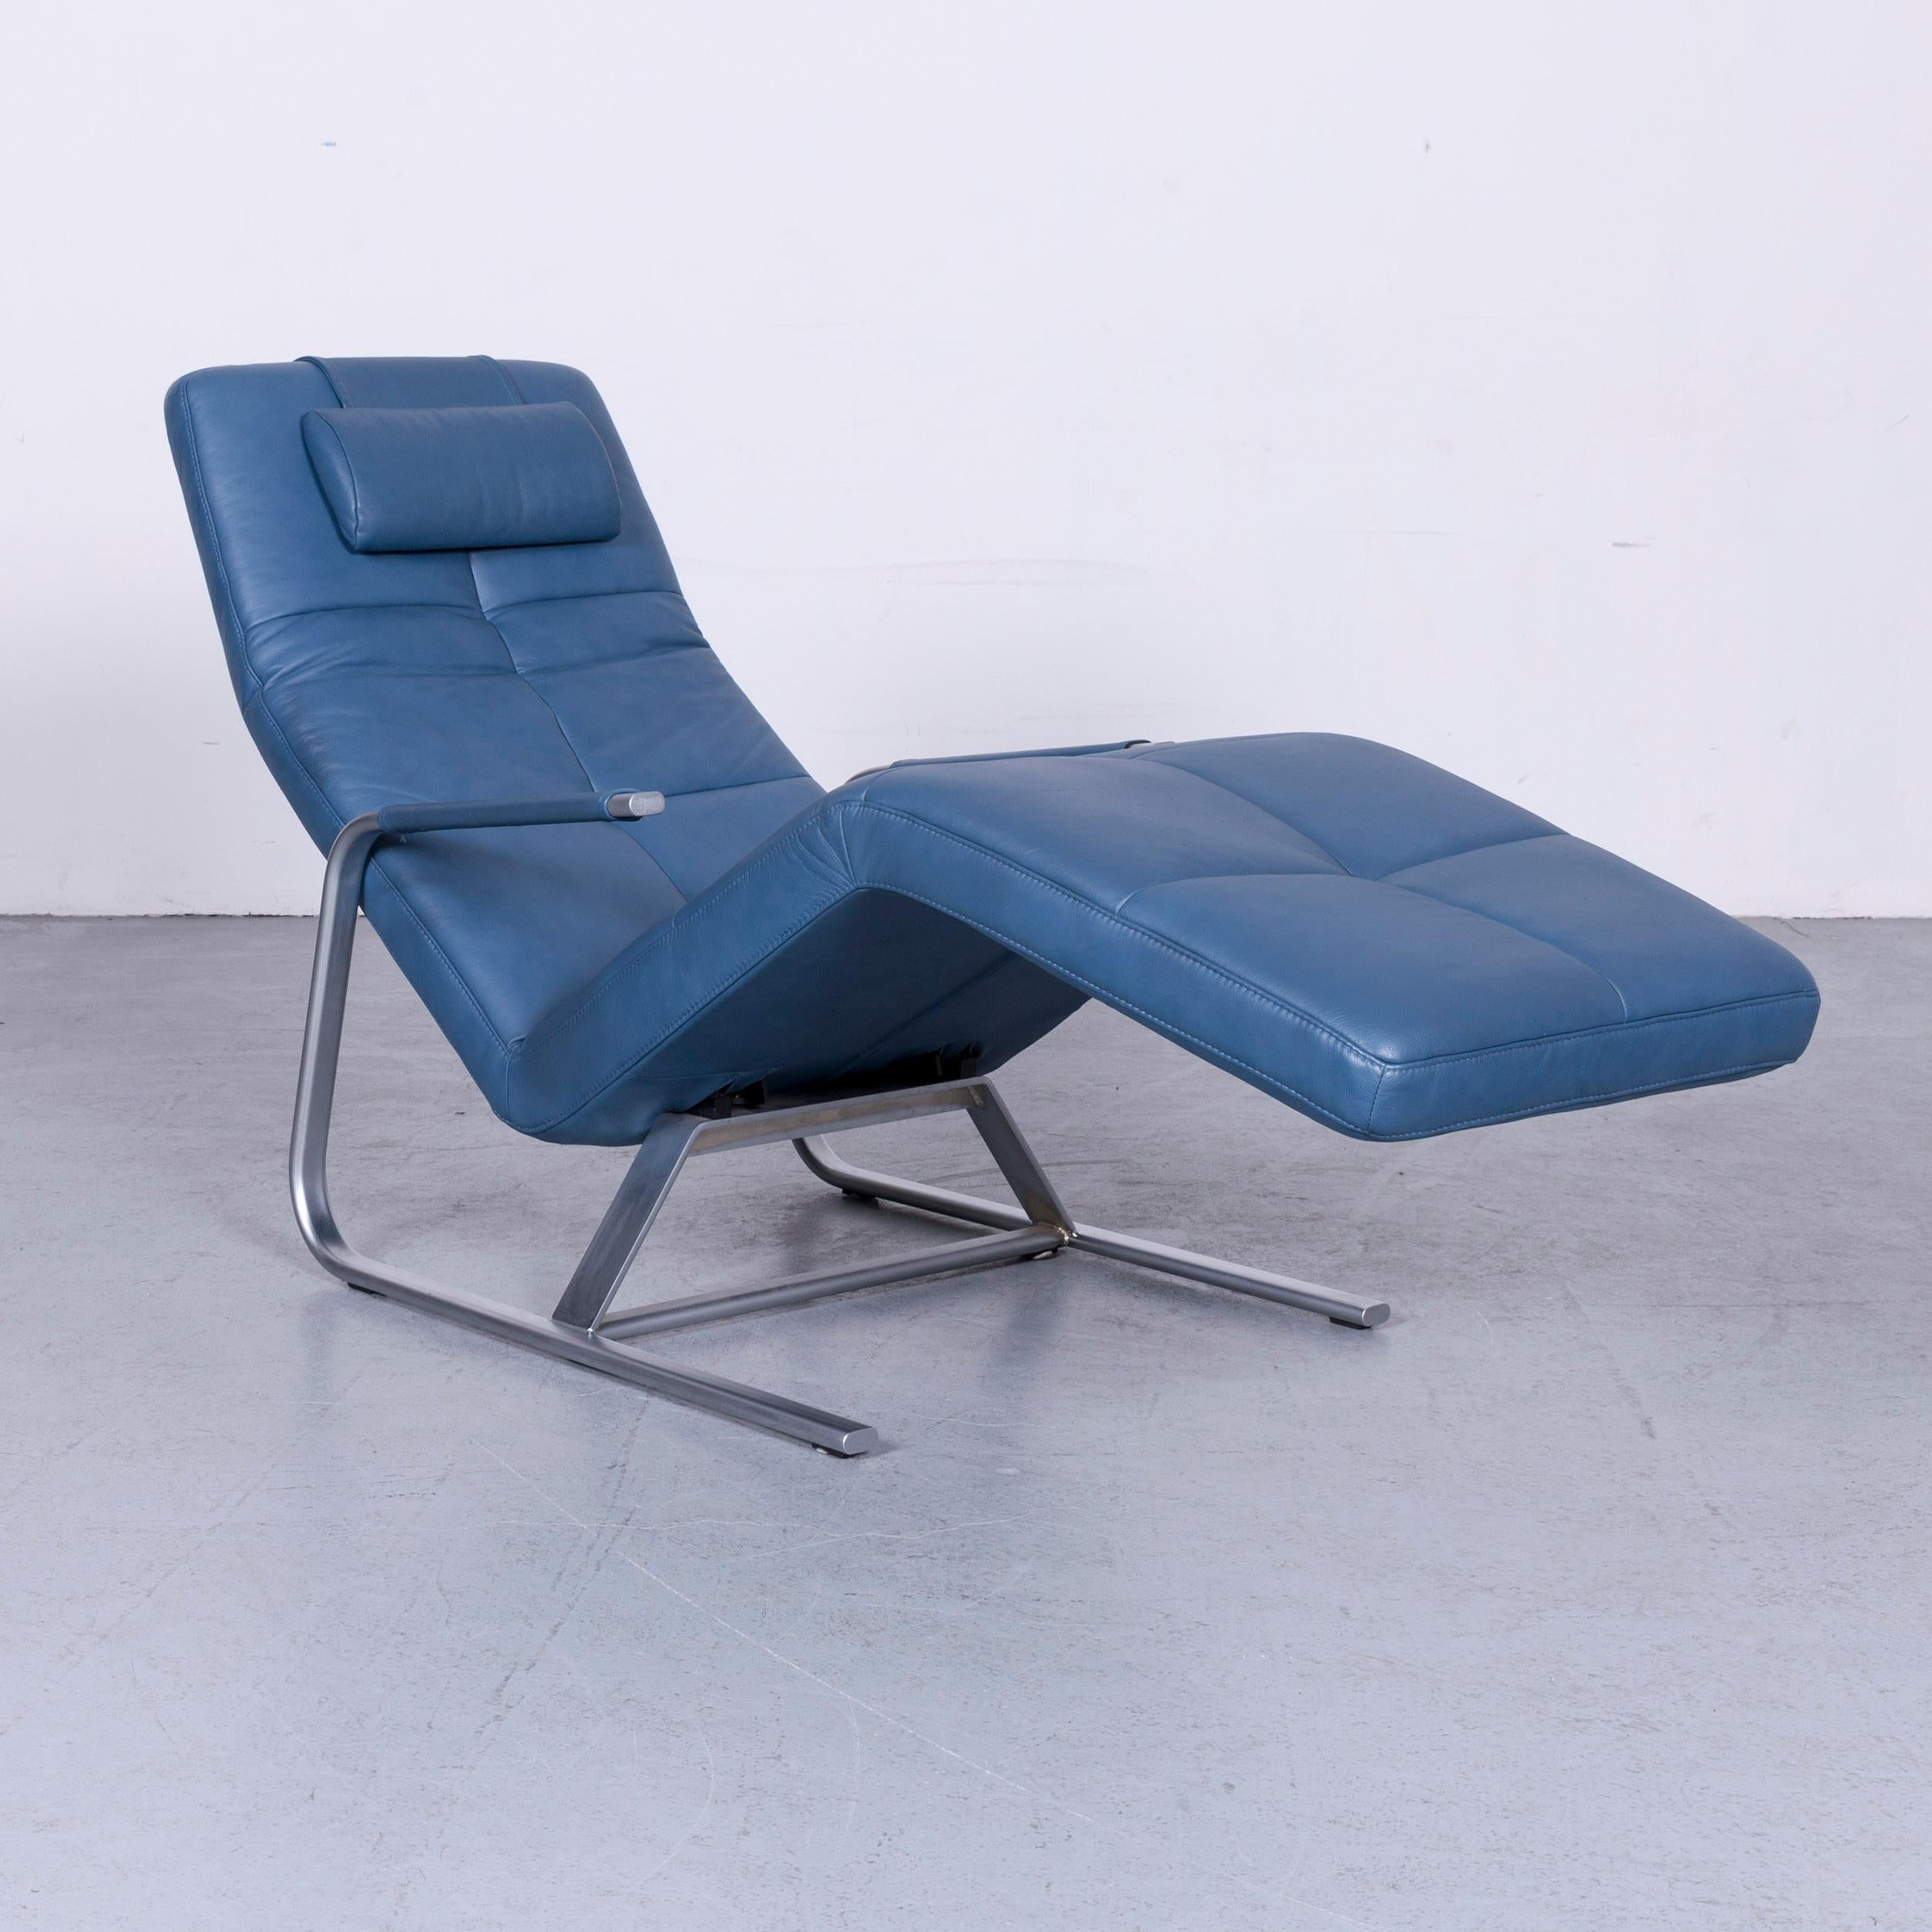 We bring to you an Ewald Schillig Vita designer leather lounger blue genuine leather single-seat.

Product measurements in centimeters:

Depth 150
Width 70
Height 90
Seat-height 40
Rest-height 50
Seat-depth 100
Seat-width